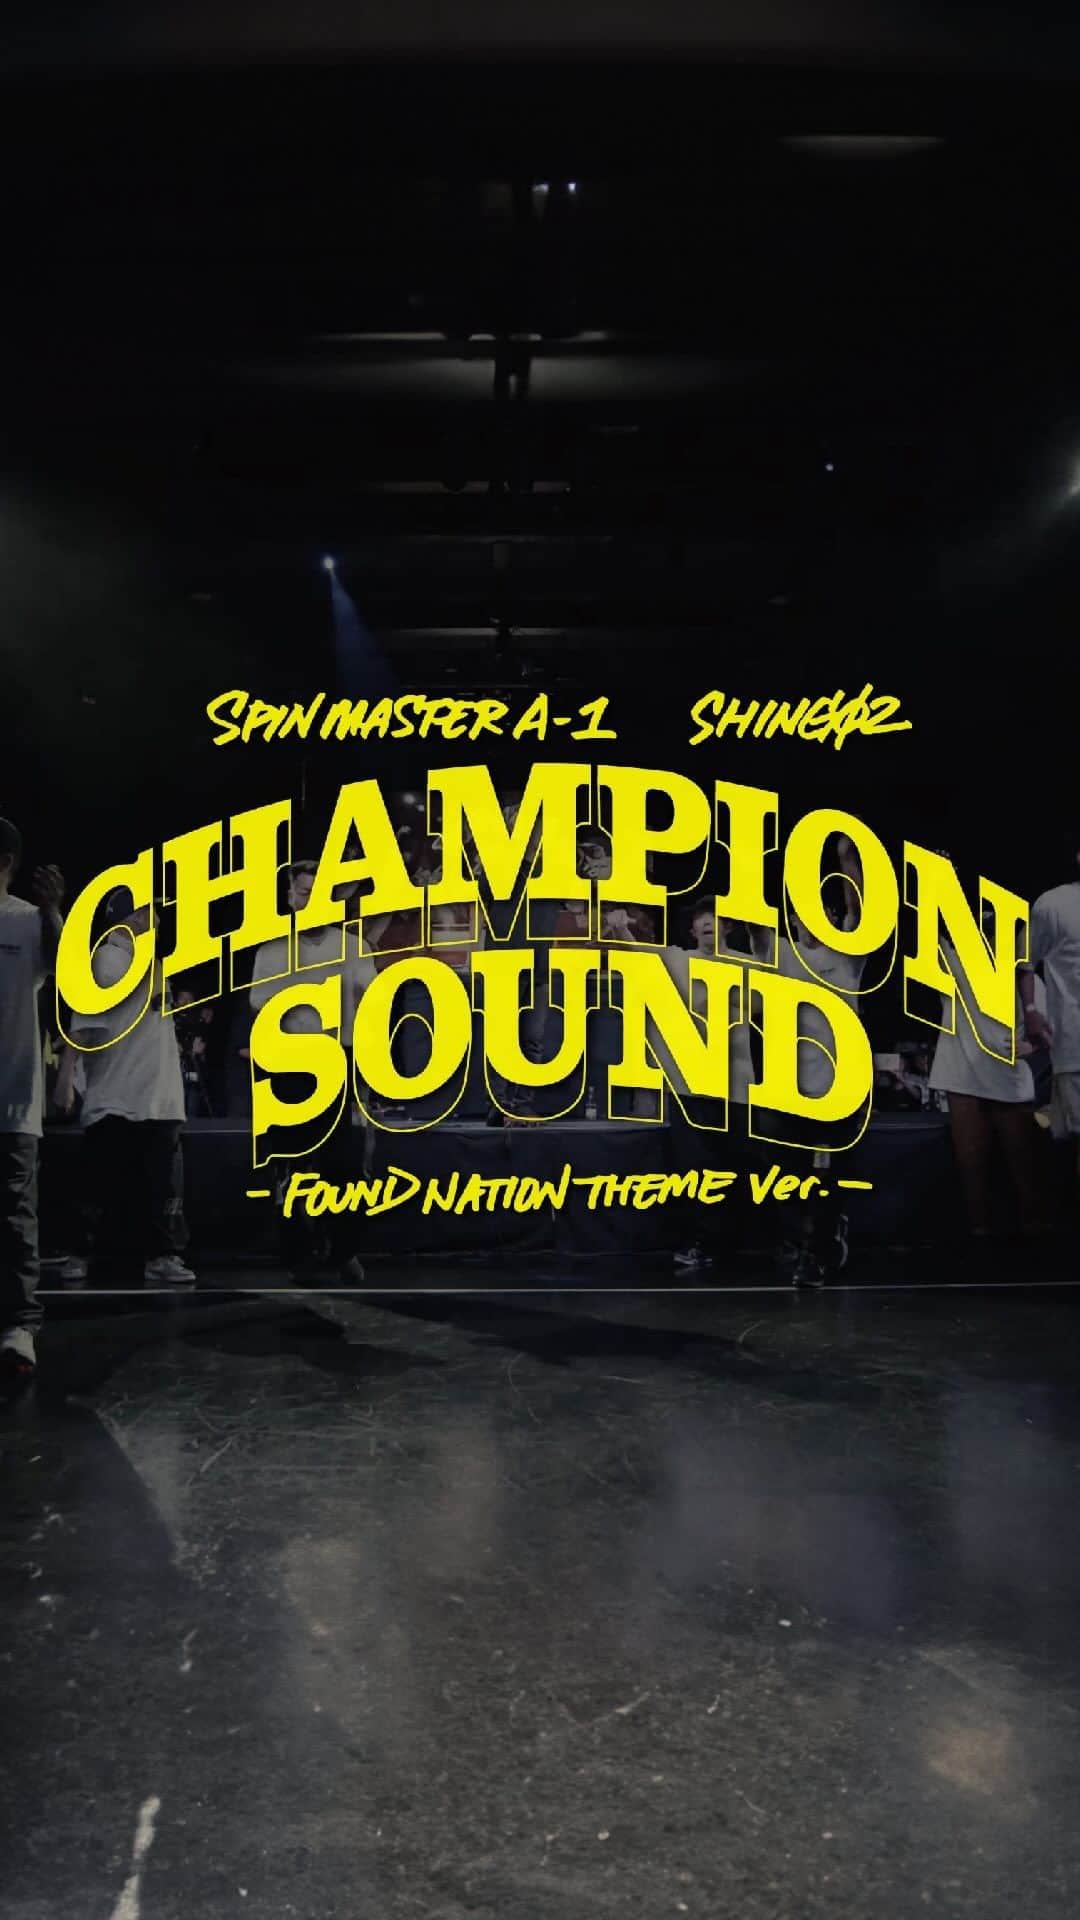 Shing02のインスタグラム：「Shing02 x SPIN MASTER A-1 x FOUND NATION【CHAMPION SOUND】Cypher on YouTube Director : 写樂 @a1championsound 🤜🏻🤛🏼 @foundnation_official」